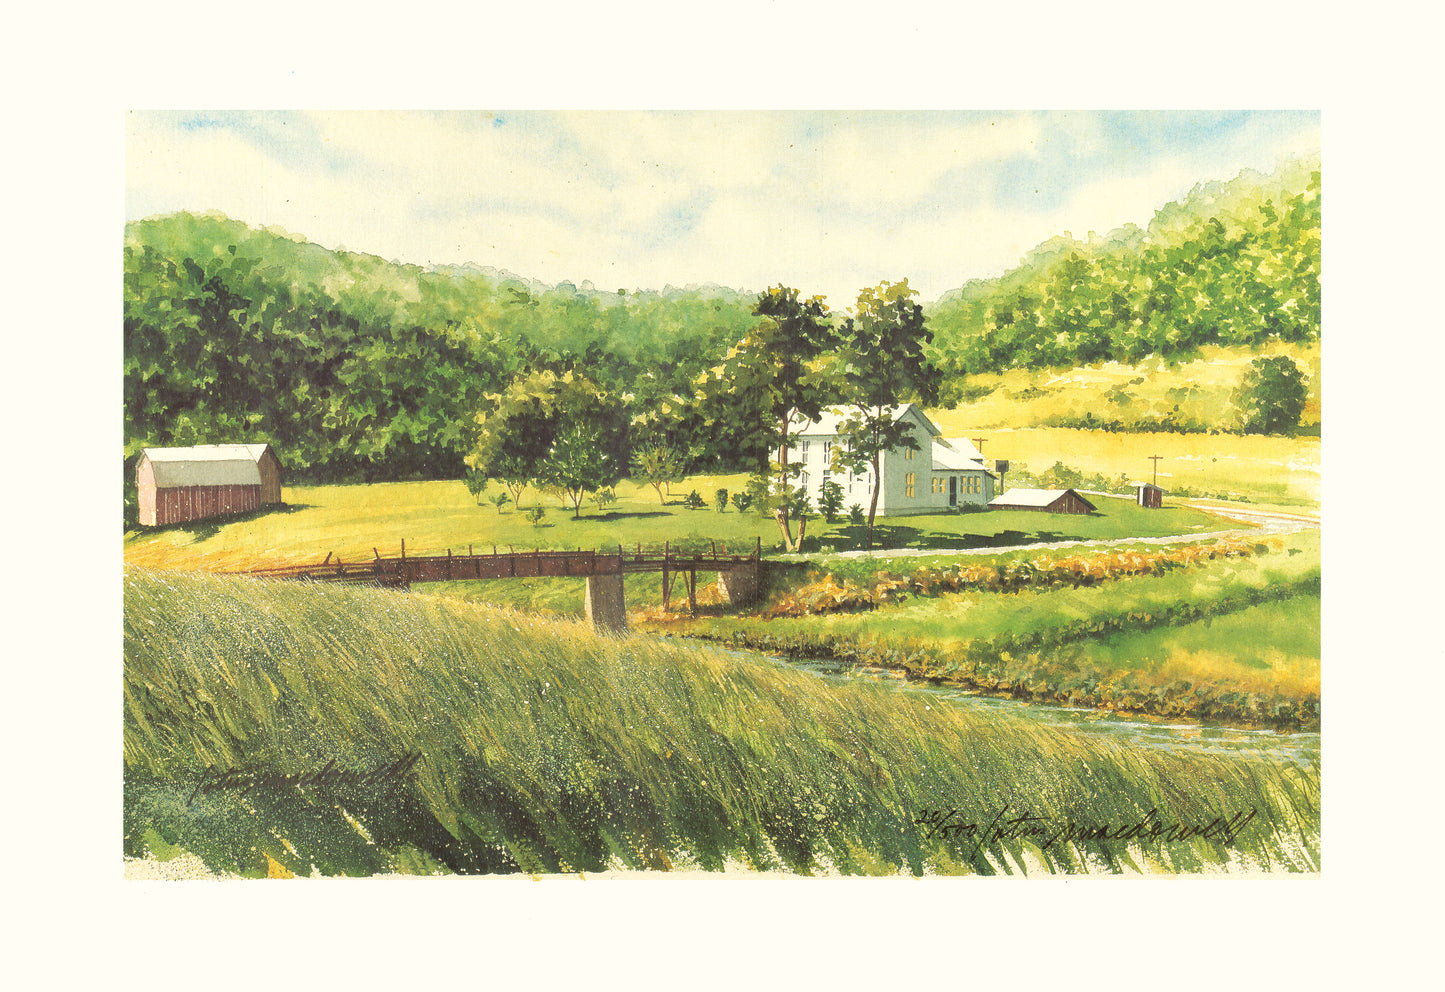 County Line- Brown, WV- Limited Edition Print: Introducing the limited-edition print version of "County Line", from an original watercolor painting by Lotus MacDowell and inspired by her love of the rural countryside. West Virginia is a state with rolling hills, white farmhouses dotting the countryside, and small streams everywhere. 